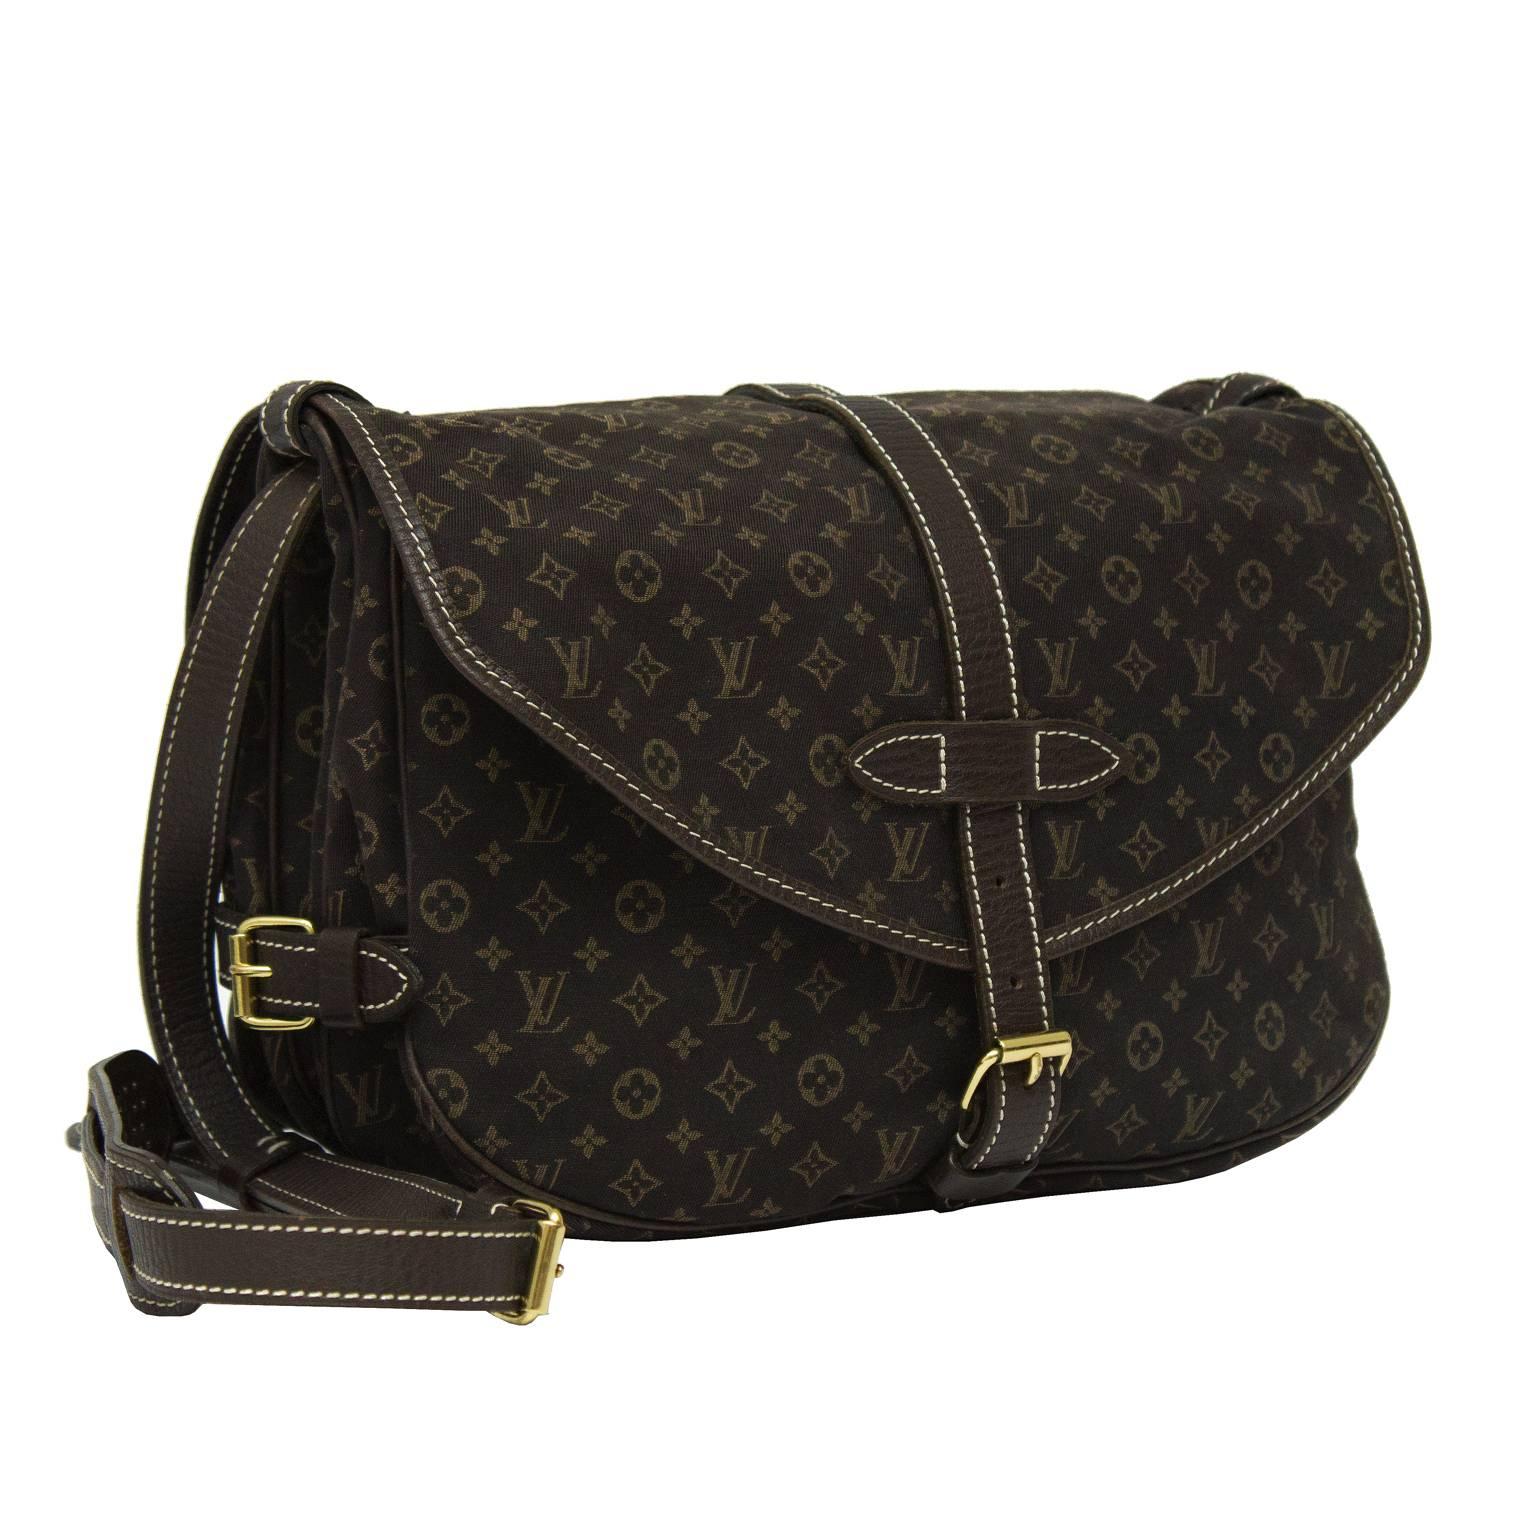 Louis Vuitton dark brown cotton monogram Saumer 30 with dark brown leather trim. The double-sided saddle bag has a top flap entry on each side with a buckle closure. The adjustable crossbody shoulder strap features a shoulder pad with a plastic